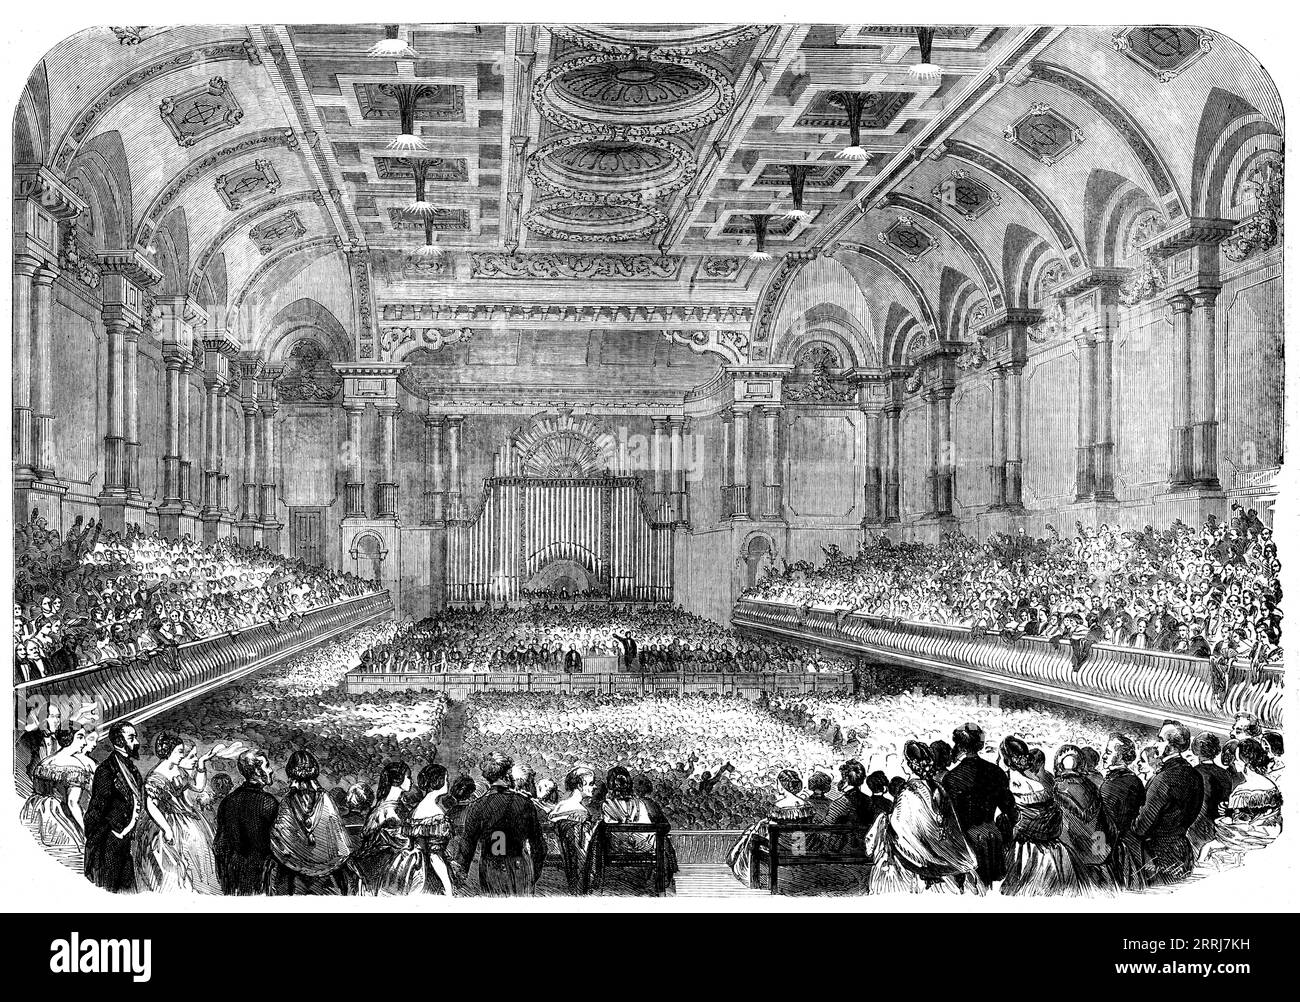 Messrs. Gibson and Bright at the Free-Trade Hall, Manchester, 1858. A soiree for '...the Right Hon. T. M. Gibson, M.P. for Ashton-under- Lyne, and Mr. John Bright, M.P. for Birmingham, for &quot;the purpose of congratulating the hon. member for Birmingham on his restoration to health; to celebrate the return of himself and his late colleague (the Right Hon. T. M. Gibson) to Parliament for the boroughs of Birmingham and Ashton; and to thank them for their patriotic conduct during the last session of Parliament, as well as for their long and faithful services as representatives for this city.&qu Stock Photo